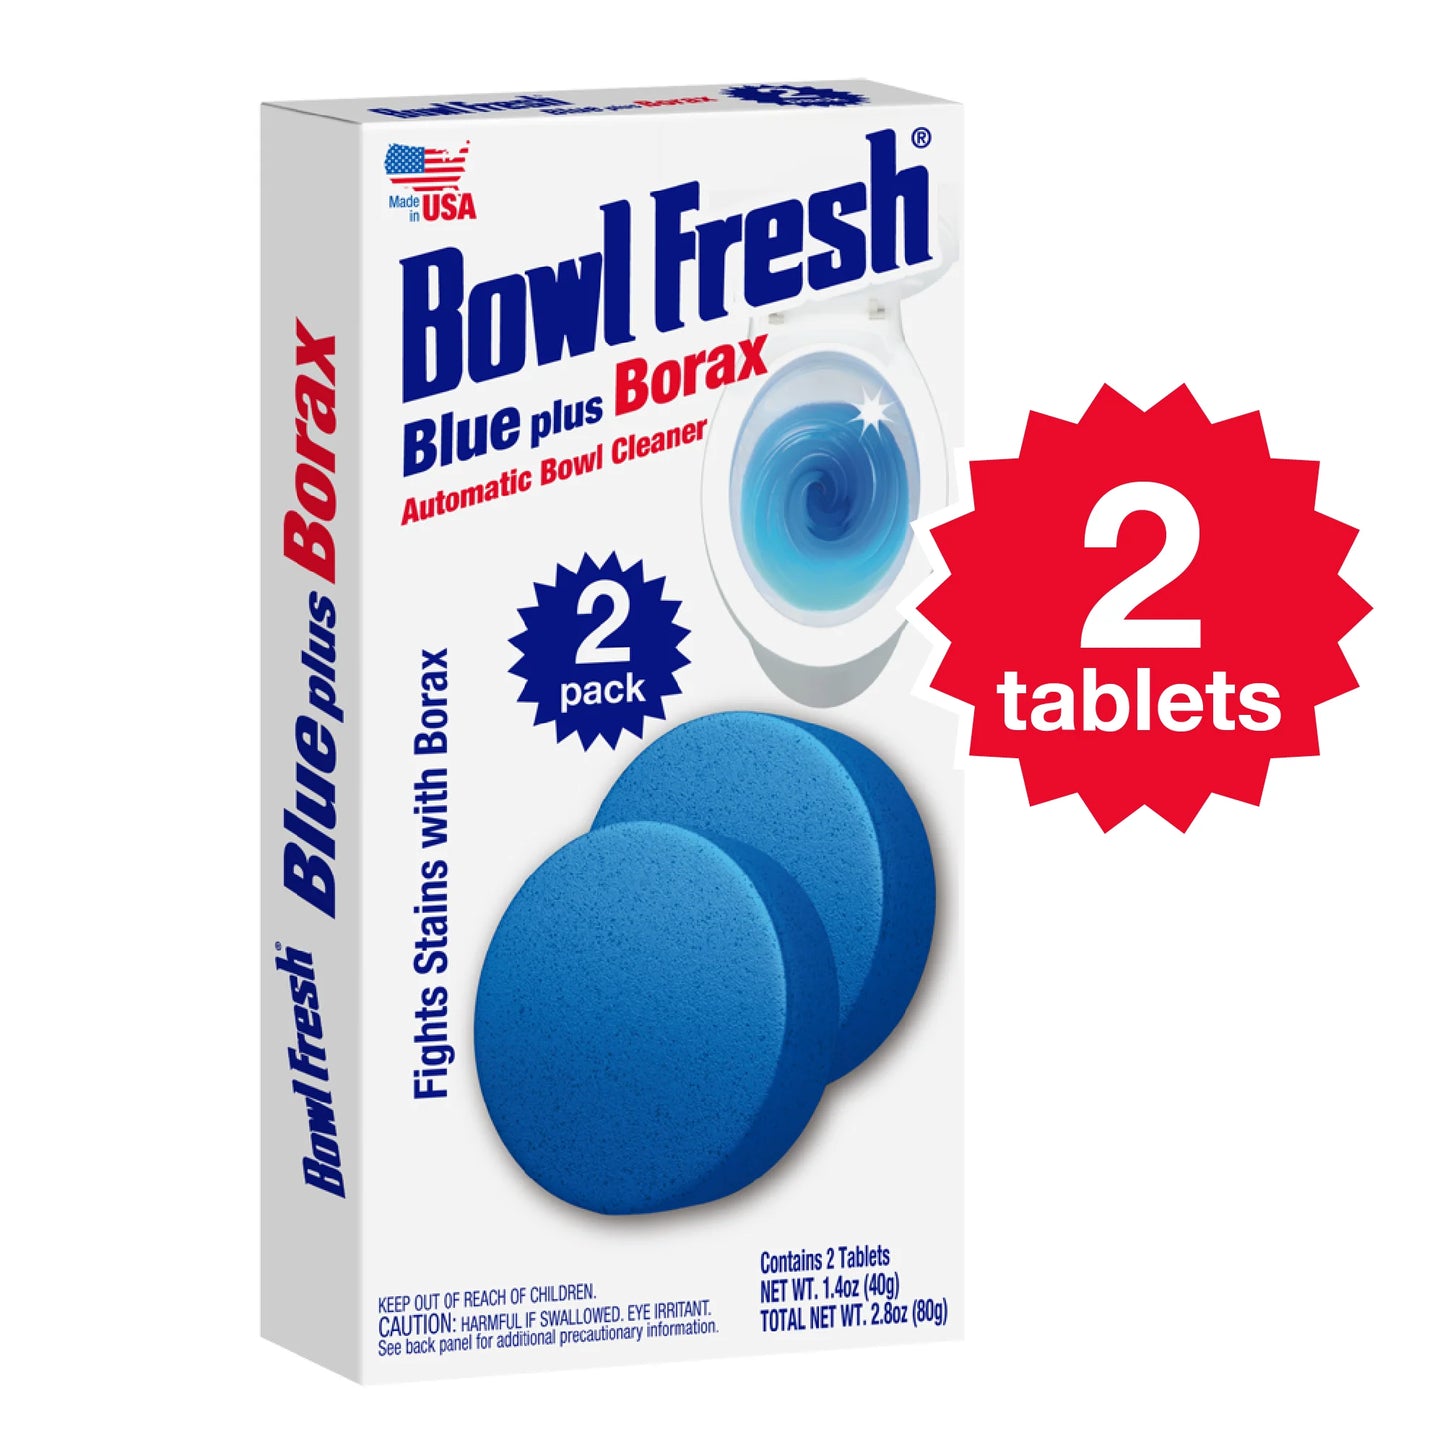 BOWL FRESH AUTOMATIC TOILET BOWL CLEANER, TOILET BOWL FRESHENER WITH BORAX, FRESH SCENT, 2 CT